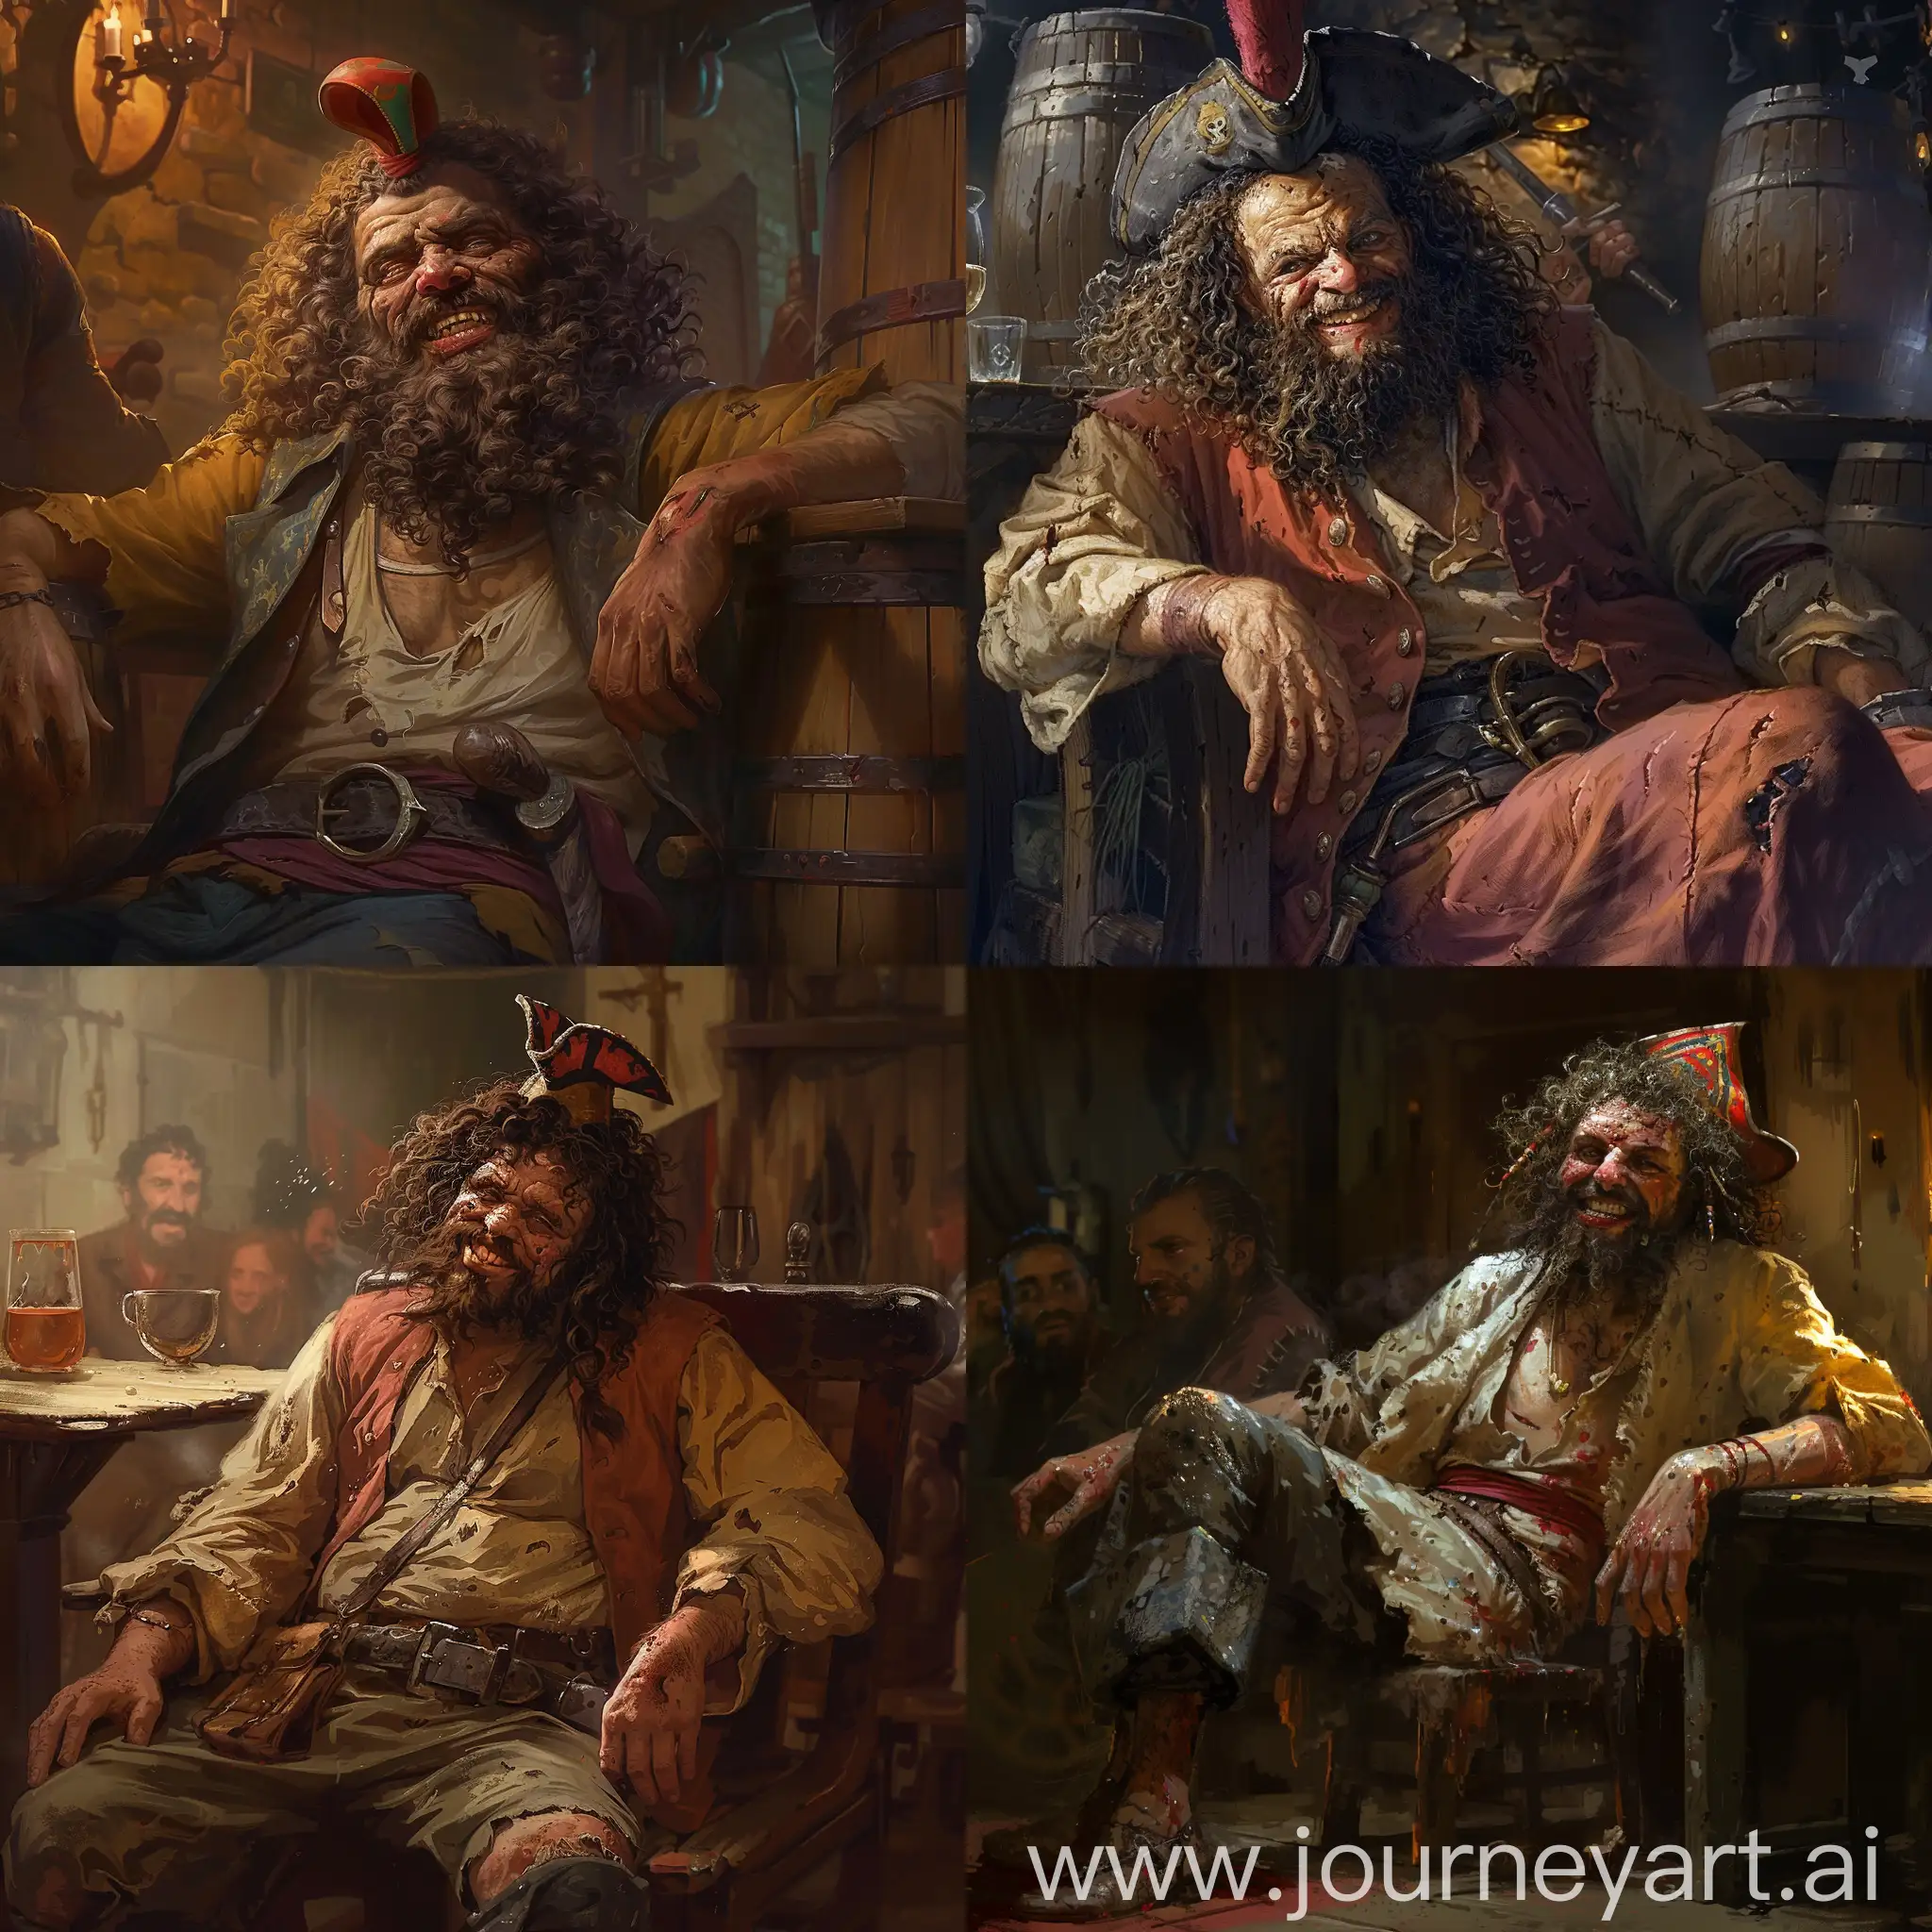 In the dim light of a tavern, amidst the raucous laughter and clinking of tankards, a medieval Greek pirate sits with an air of smug satisfaction. His filthy appearance belies a confidence that borders on arrogance, as he lounges in his seat with a self-assured smirk playing upon his lips.

His curly beard and long, unkempt hair frame a face weathered by years of seafaring adventures, with a missing tooth adding a touch of rugged charm to his otherwise disheveled appearance. Despite his grime-covered visage, there is a glint of mischief in his eyes, hinting at the cunning and wit that have served him well in his life as a pirate.

Perched jauntily atop his head is a Fez, a nod to his Mediterranean roots and penchant for exotic flair. Its vibrant hue stands out against the backdrop of the tavern, a symbol of his defiance and independence in the face of authority.

As he lounges in his seat, one hand casually resting on the hilt of his cutlass, the medieval Greek pirate exudes an aura of danger and intrigue. His smug expression speaks volumes, daring anyone who dares to challenge him to try their luck and face the consequences.

In the world of cutthroats and thieves, this pirate is a force to be reckoned with—a man of mystery and danger whose legend will echo through the annals of history for generations to come.